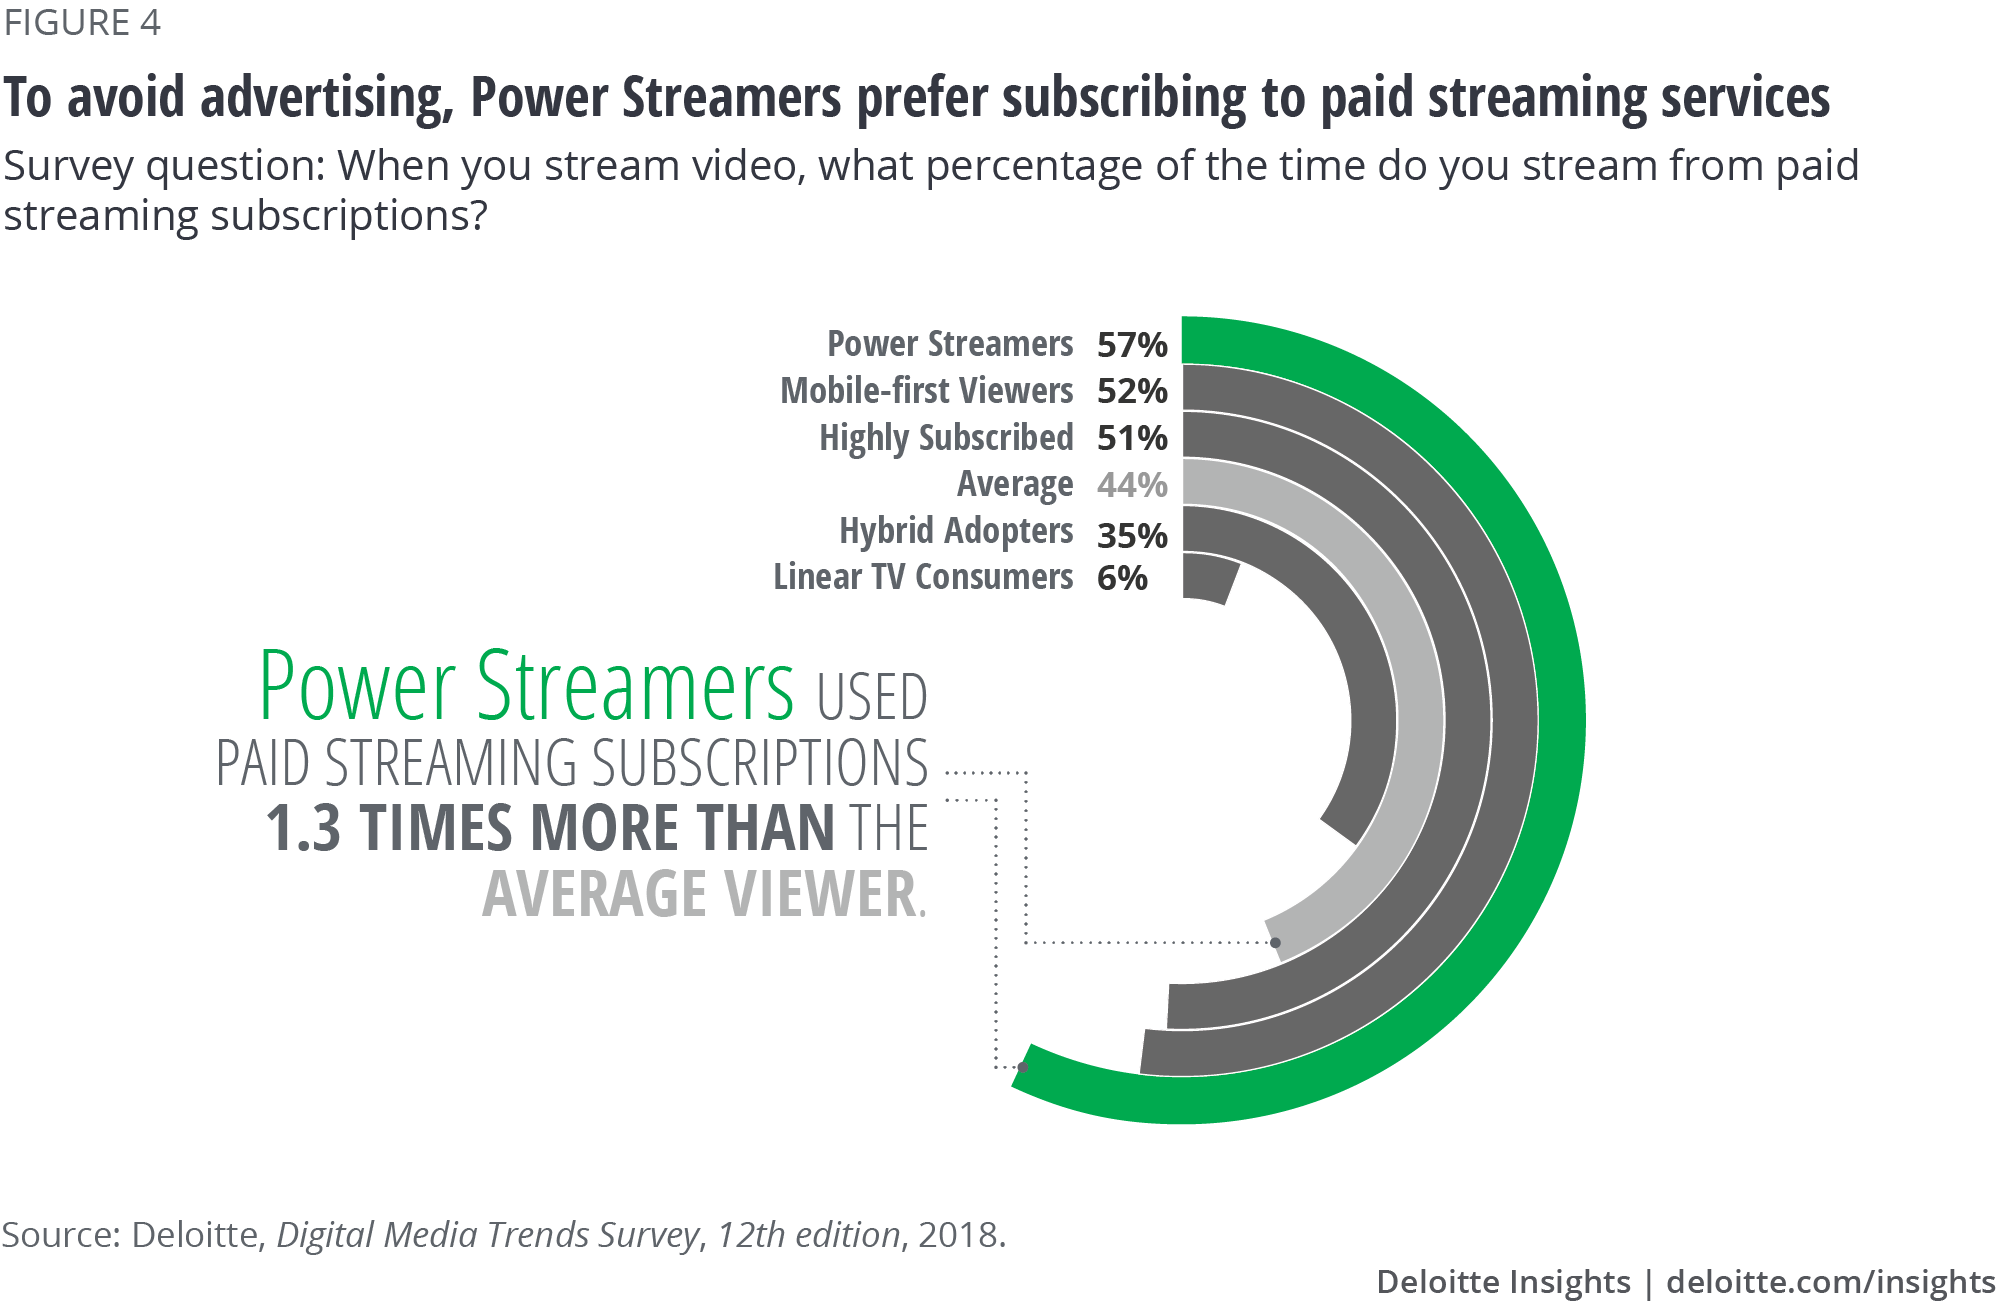 To avoid advertising, Power Streamers prefer subscribing to paid streaming services